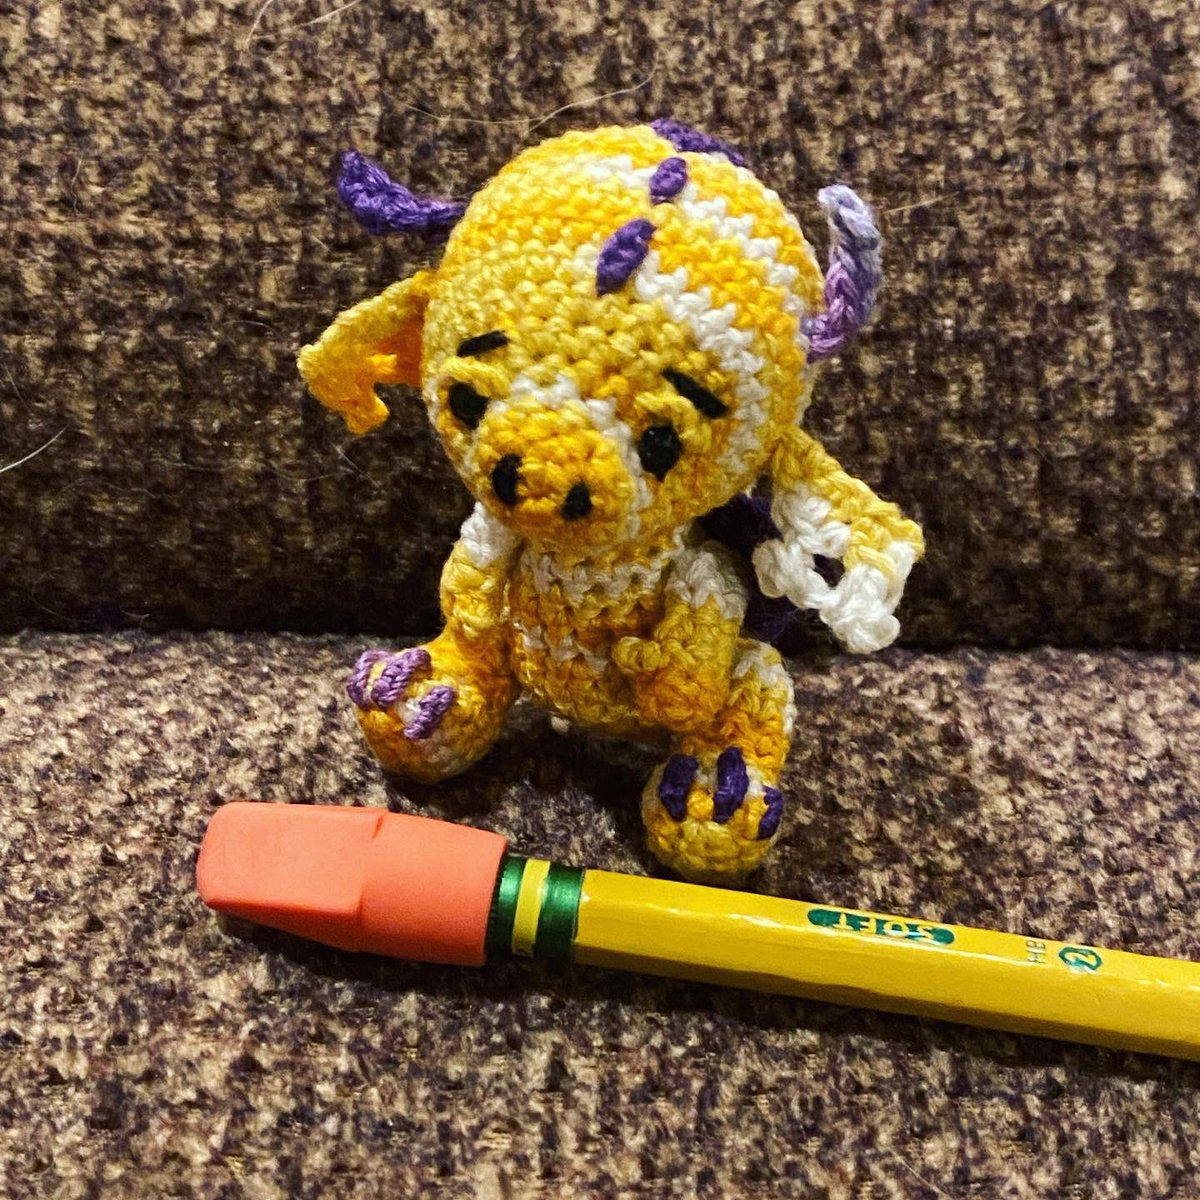 Some pocket sized dragons to go with you on all your adventures. Little yellow bean still needs a forever home. #art #craft #crochet #amigurumi #dragon #embroideryfloss #friendshipthread #forsale